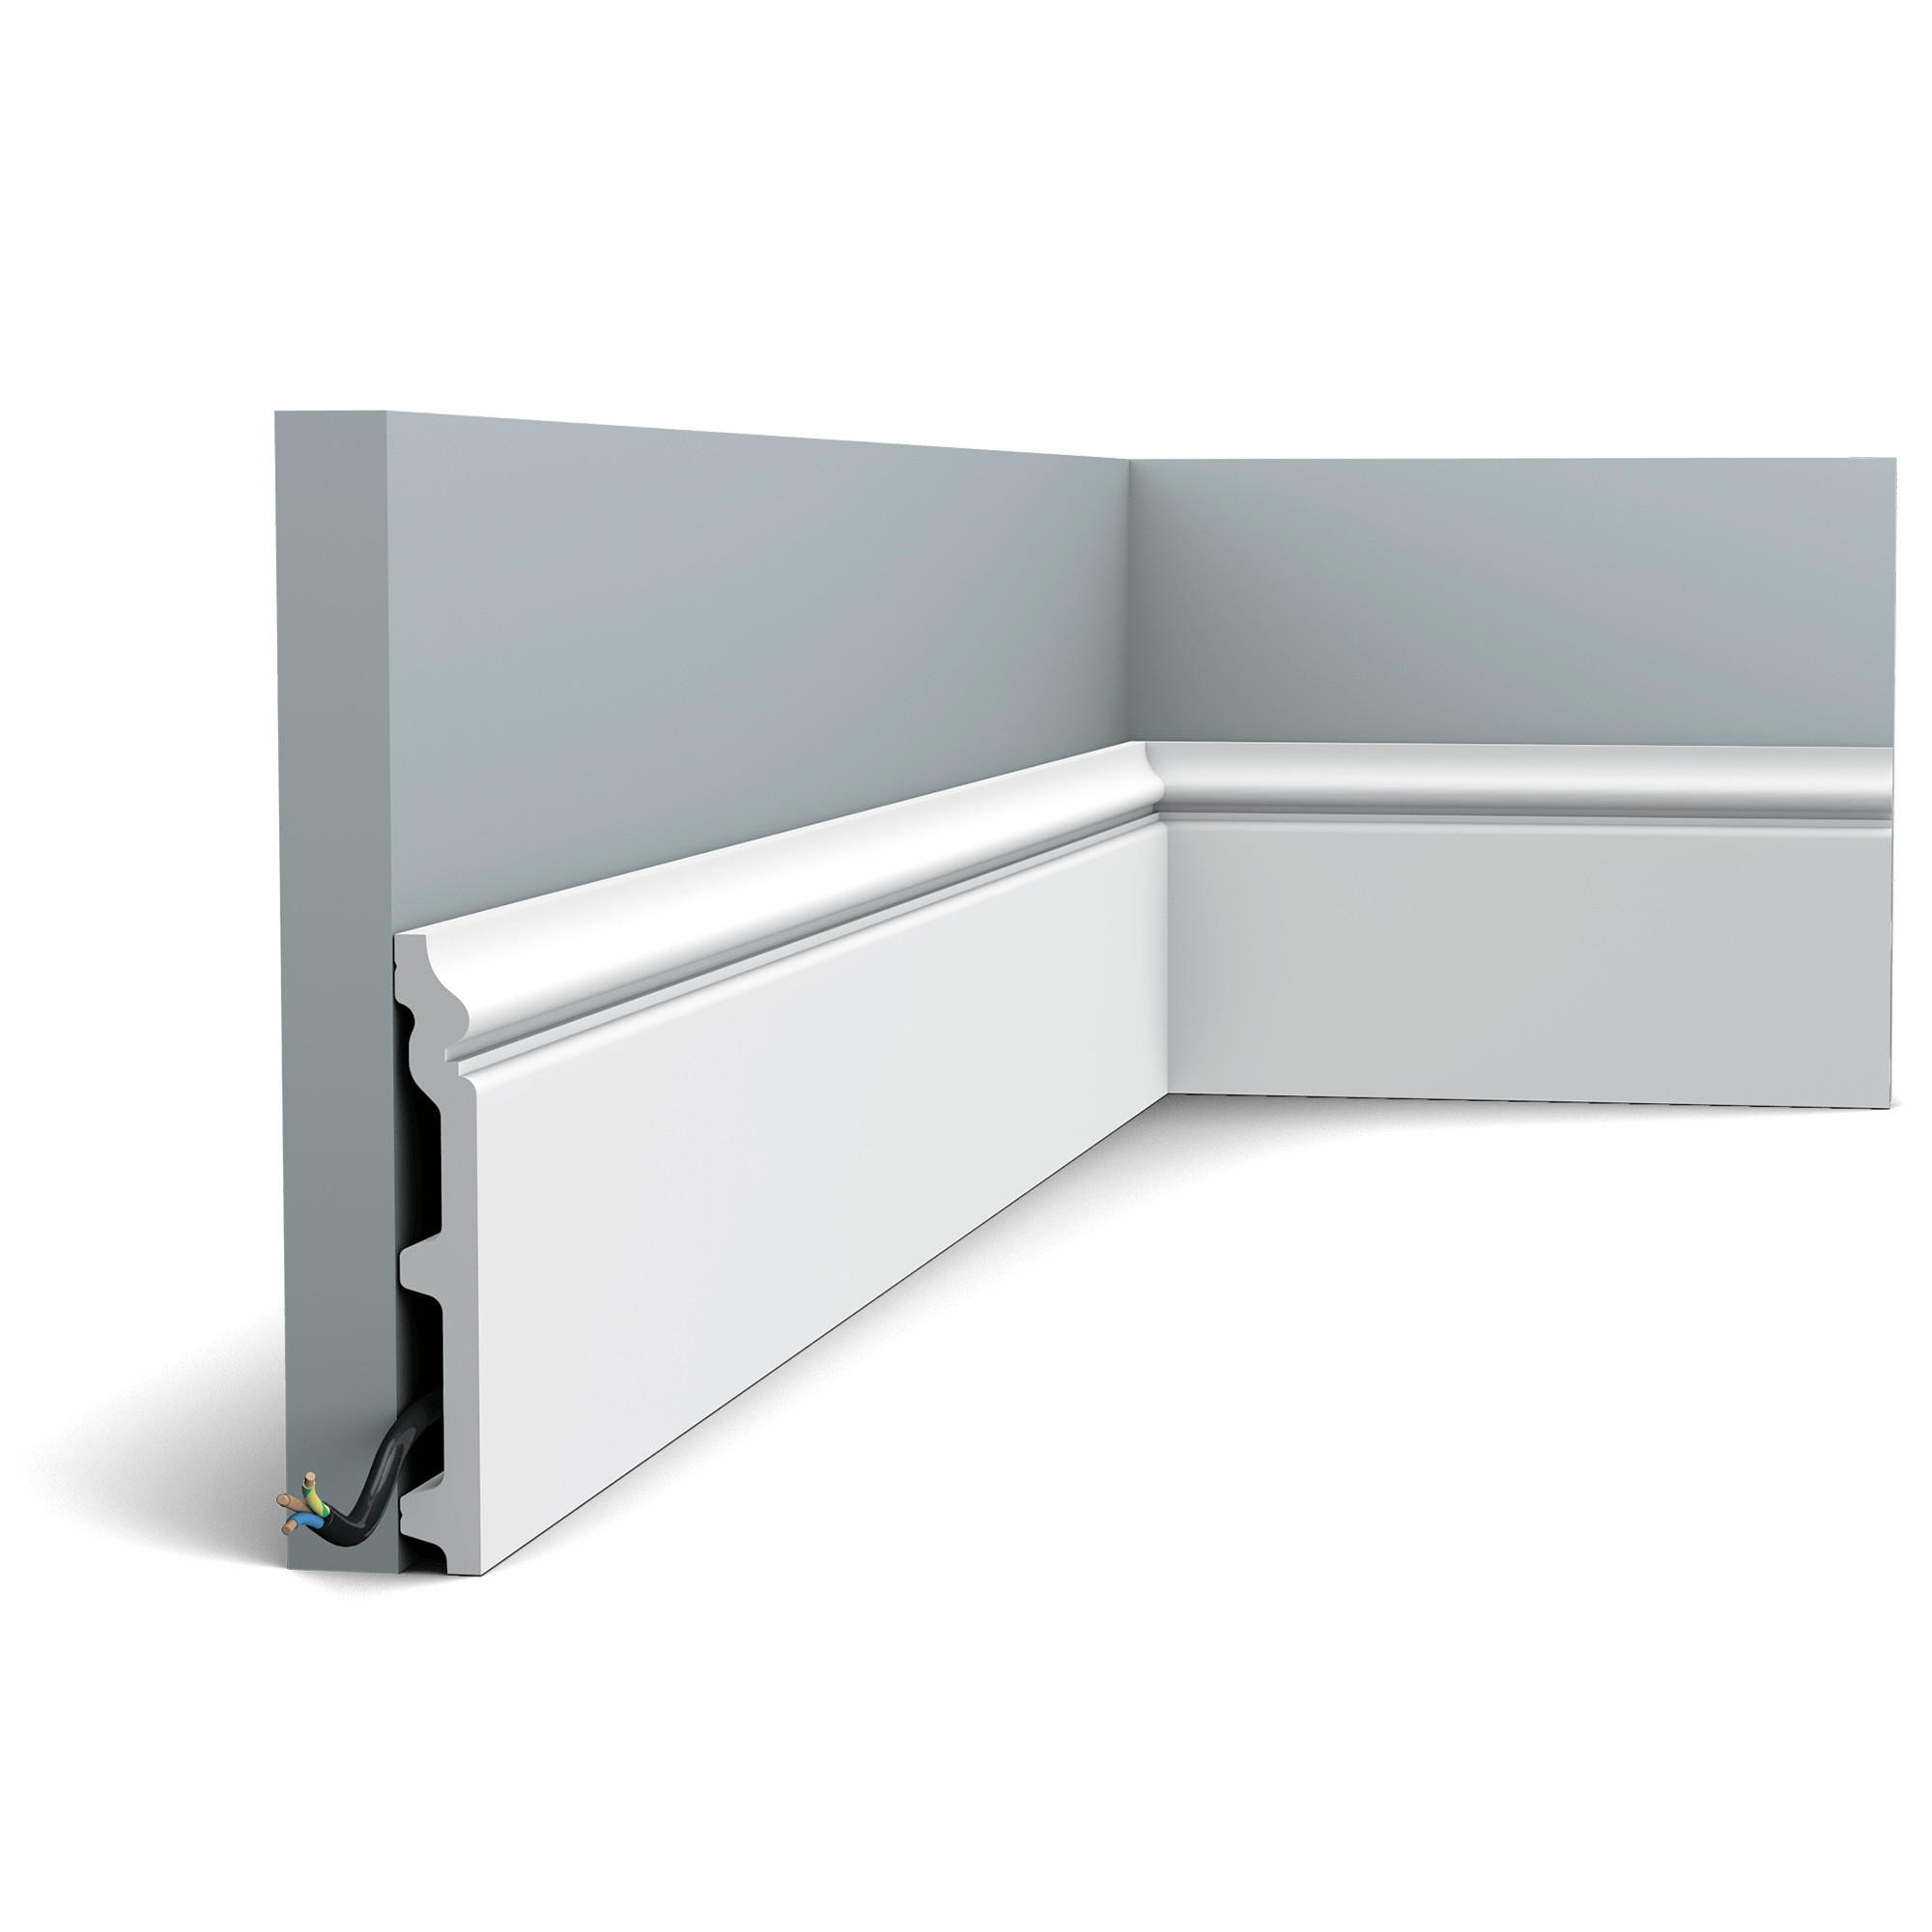 This classic skirting board is part of the CONTOUR family. To create a consistent look for the entire dwelling, we provide the same design in various sizes.